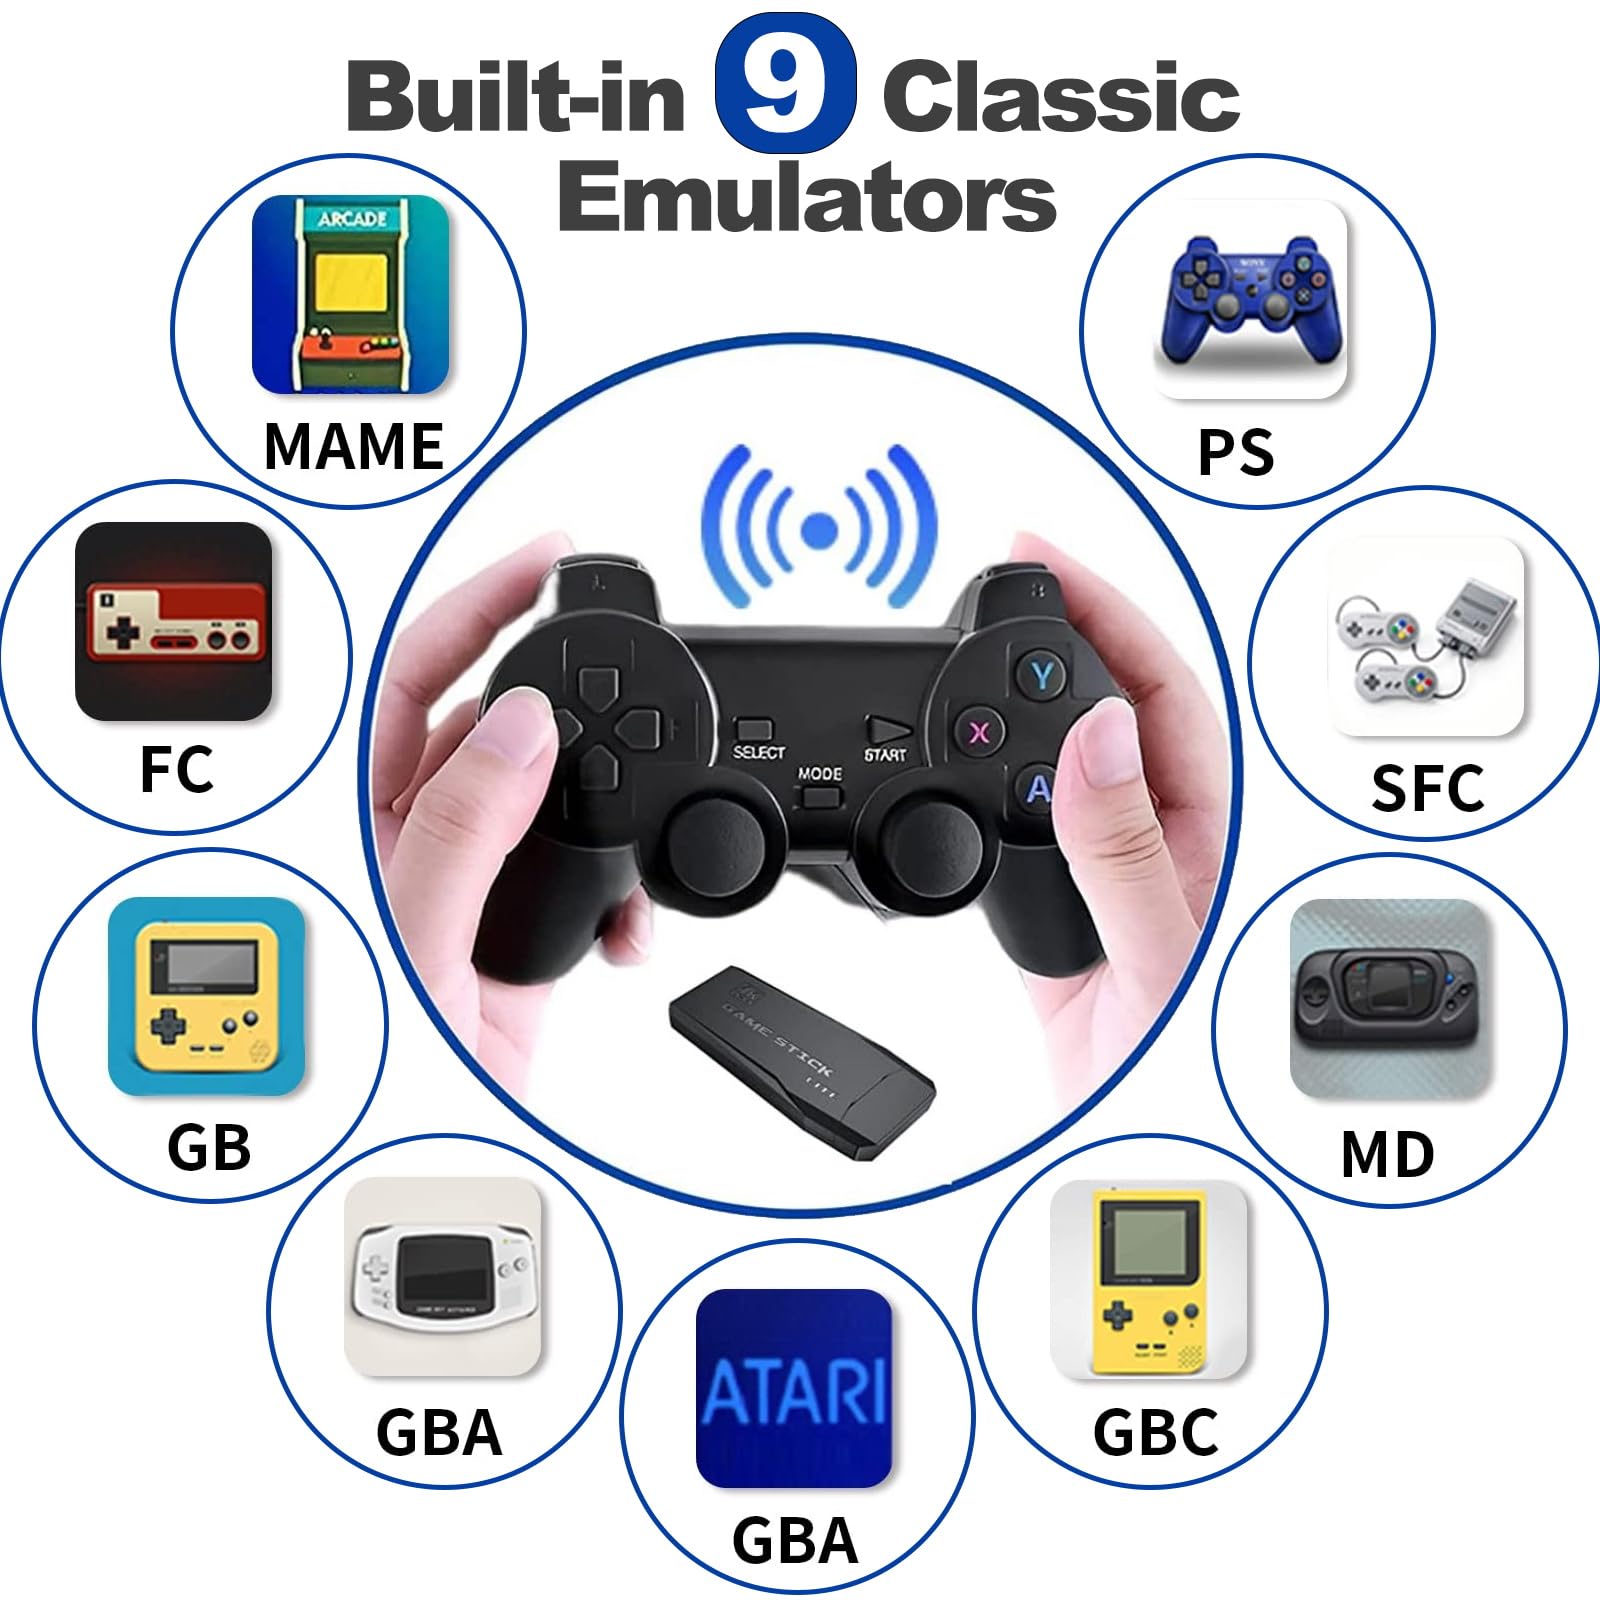 ZLYSYCM Wireless Retro Game Console, Retro Game Stick, Nostalgia Stick Game, 20,000+ Games & 9 Emulators Built in, Plug and Play Video Games for Tv 4K HDMI, 2.4g Wireless Controllers (64G)